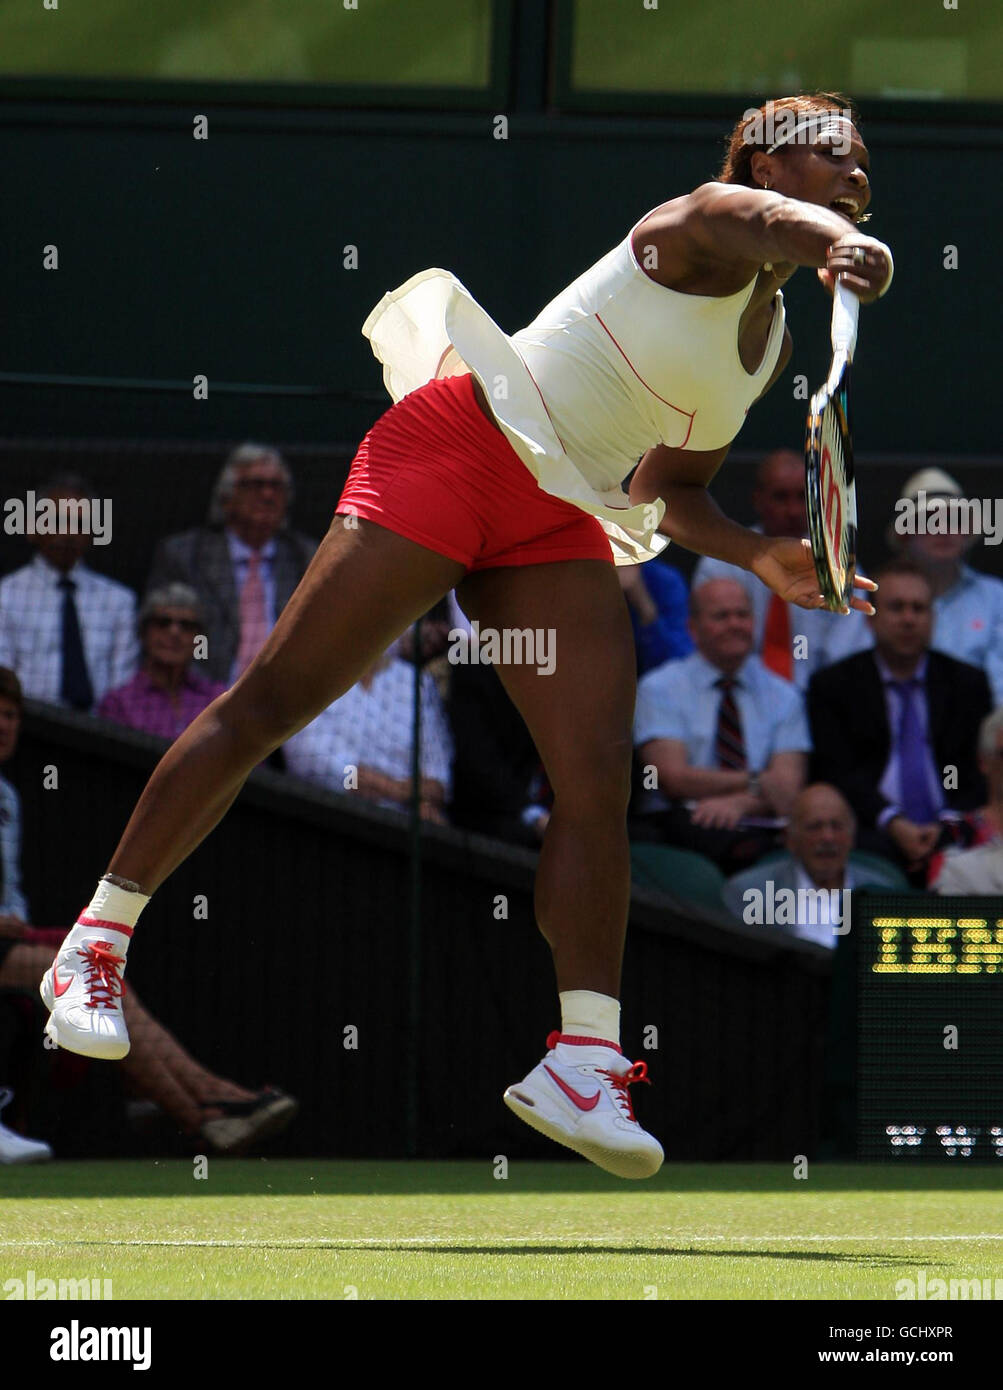 USA's Serena Williams in action against Portugal's Michelle Larcher De Brito during Day Two of the 2010 Wimbledon Championships at the All England Lawn Tennis Club, Wimbledon. Stock Photo